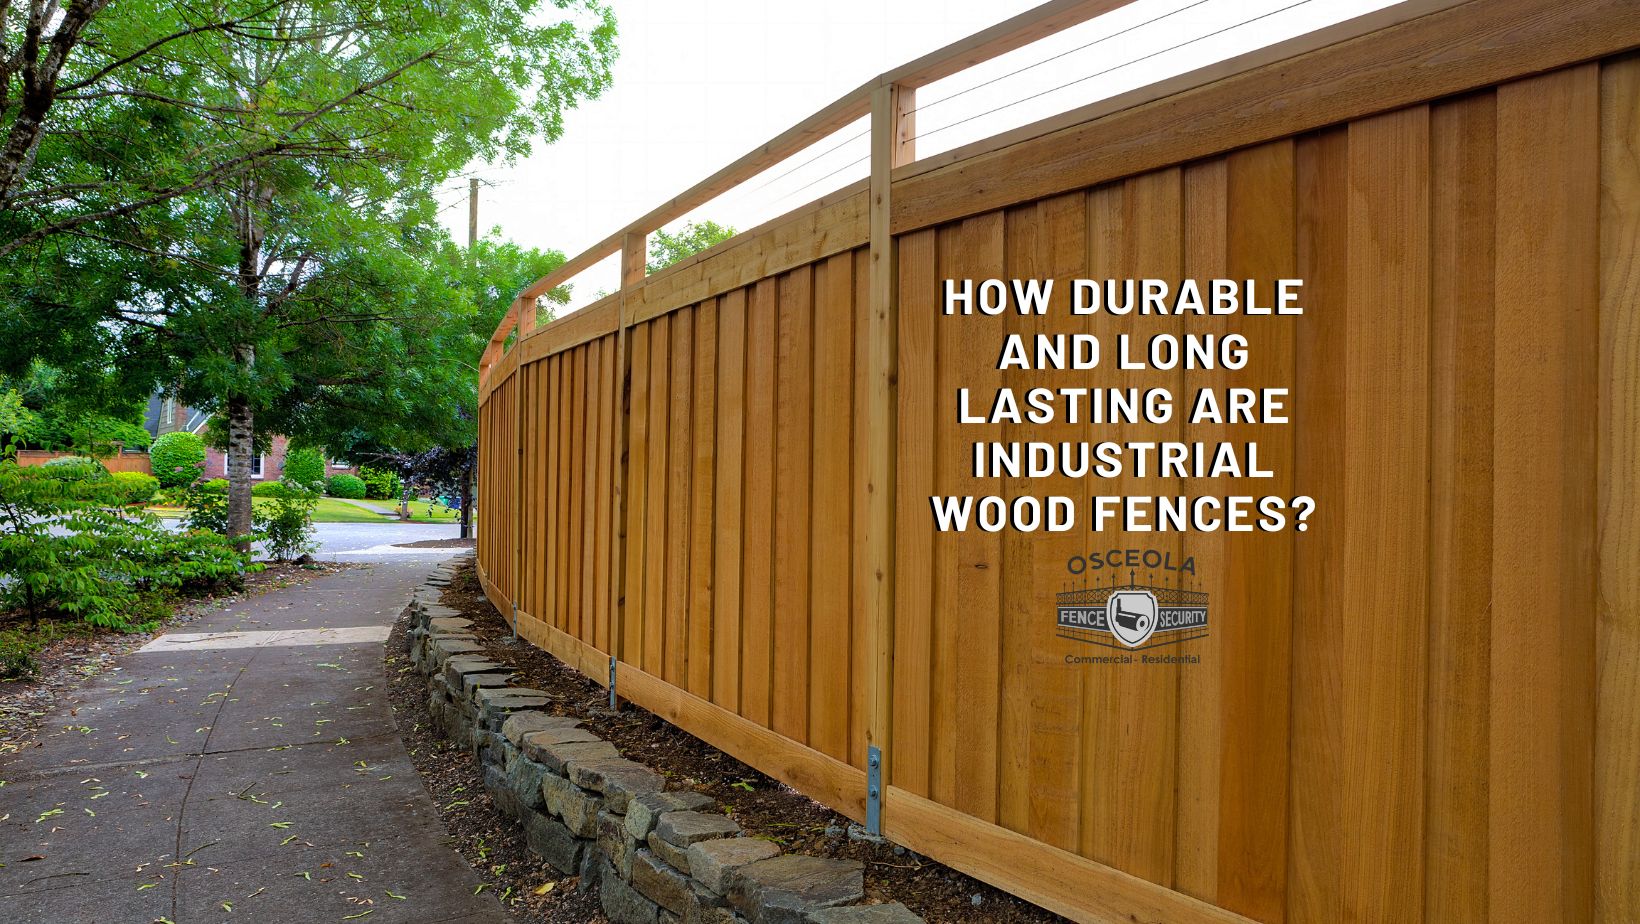 How Durable And Long Lasting Are Industrial Wood Fences?